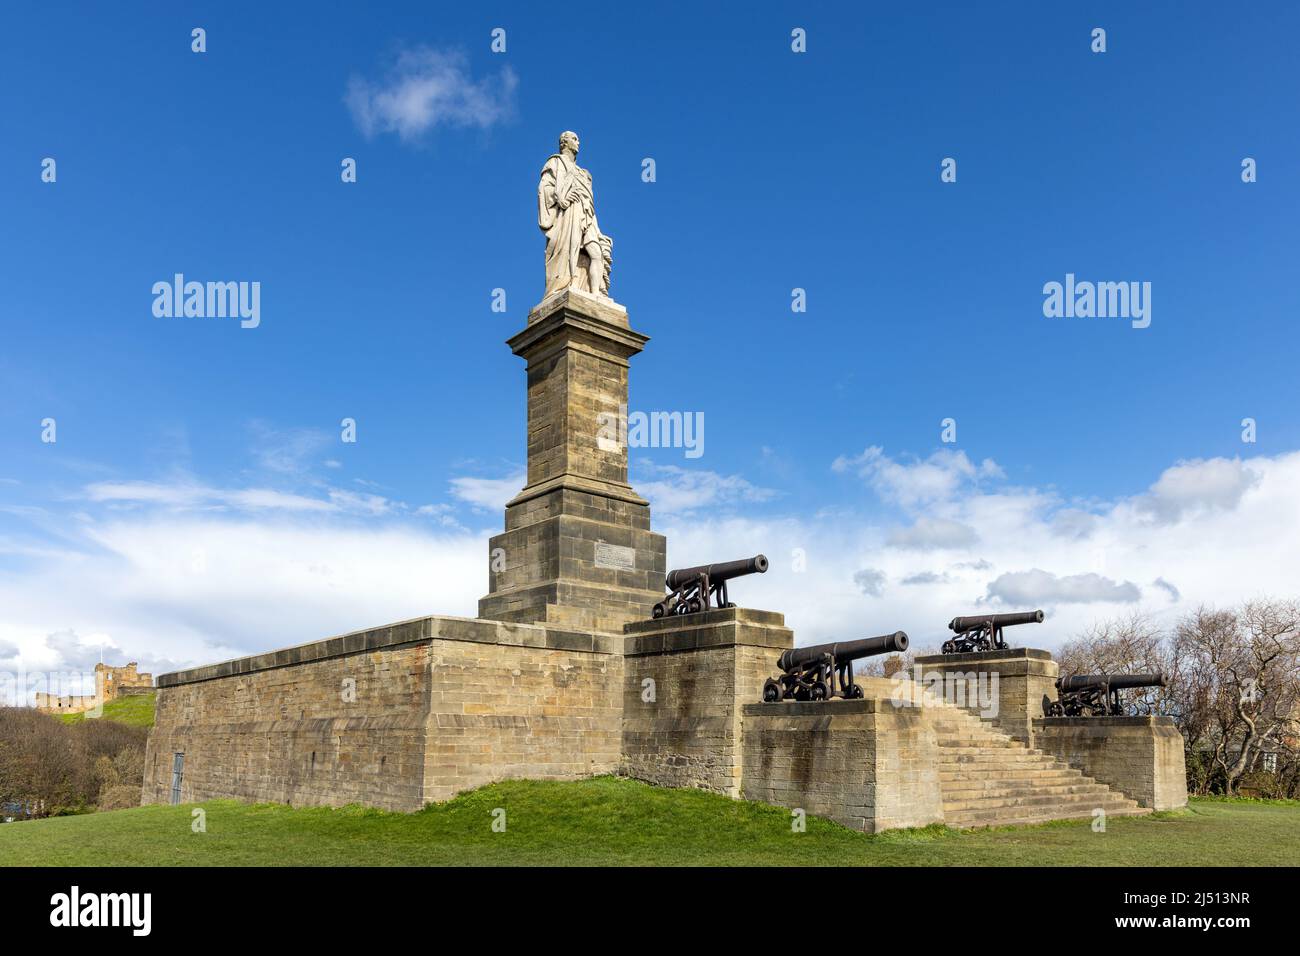 Admiral Lord Collingwood monument in Tynemouth, north-east England.  Sculptor John Graham Lough, architect John Dobson. A grade II listed monument. Stock Photo